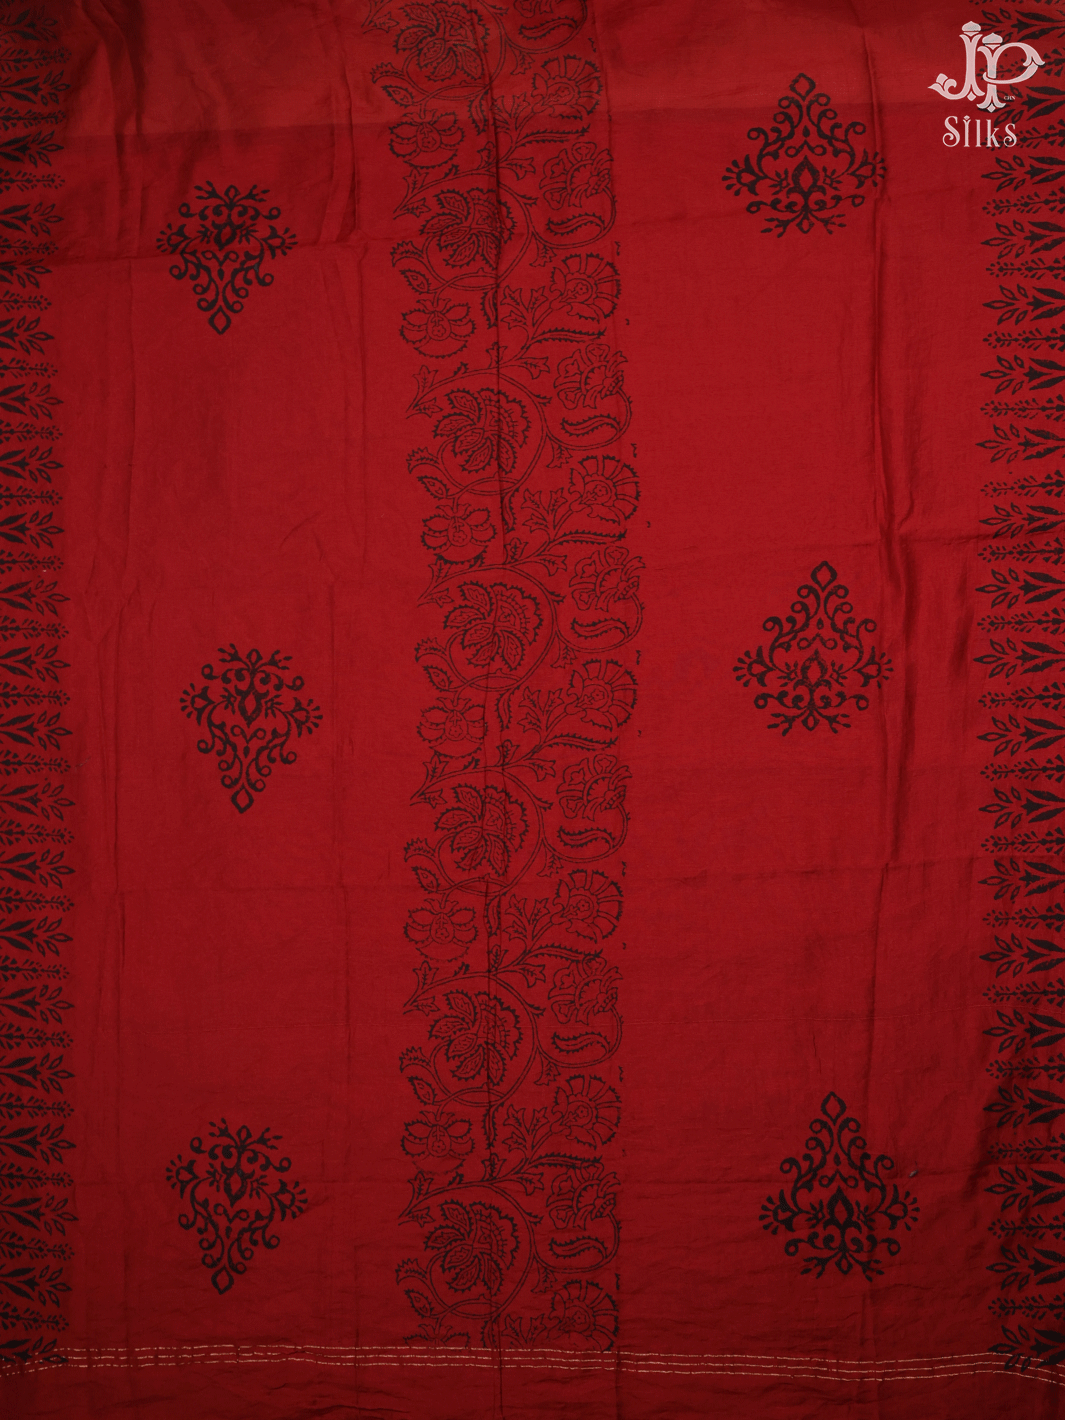 Red and Black Cotton Chudidhar Material - E6127 - View 6